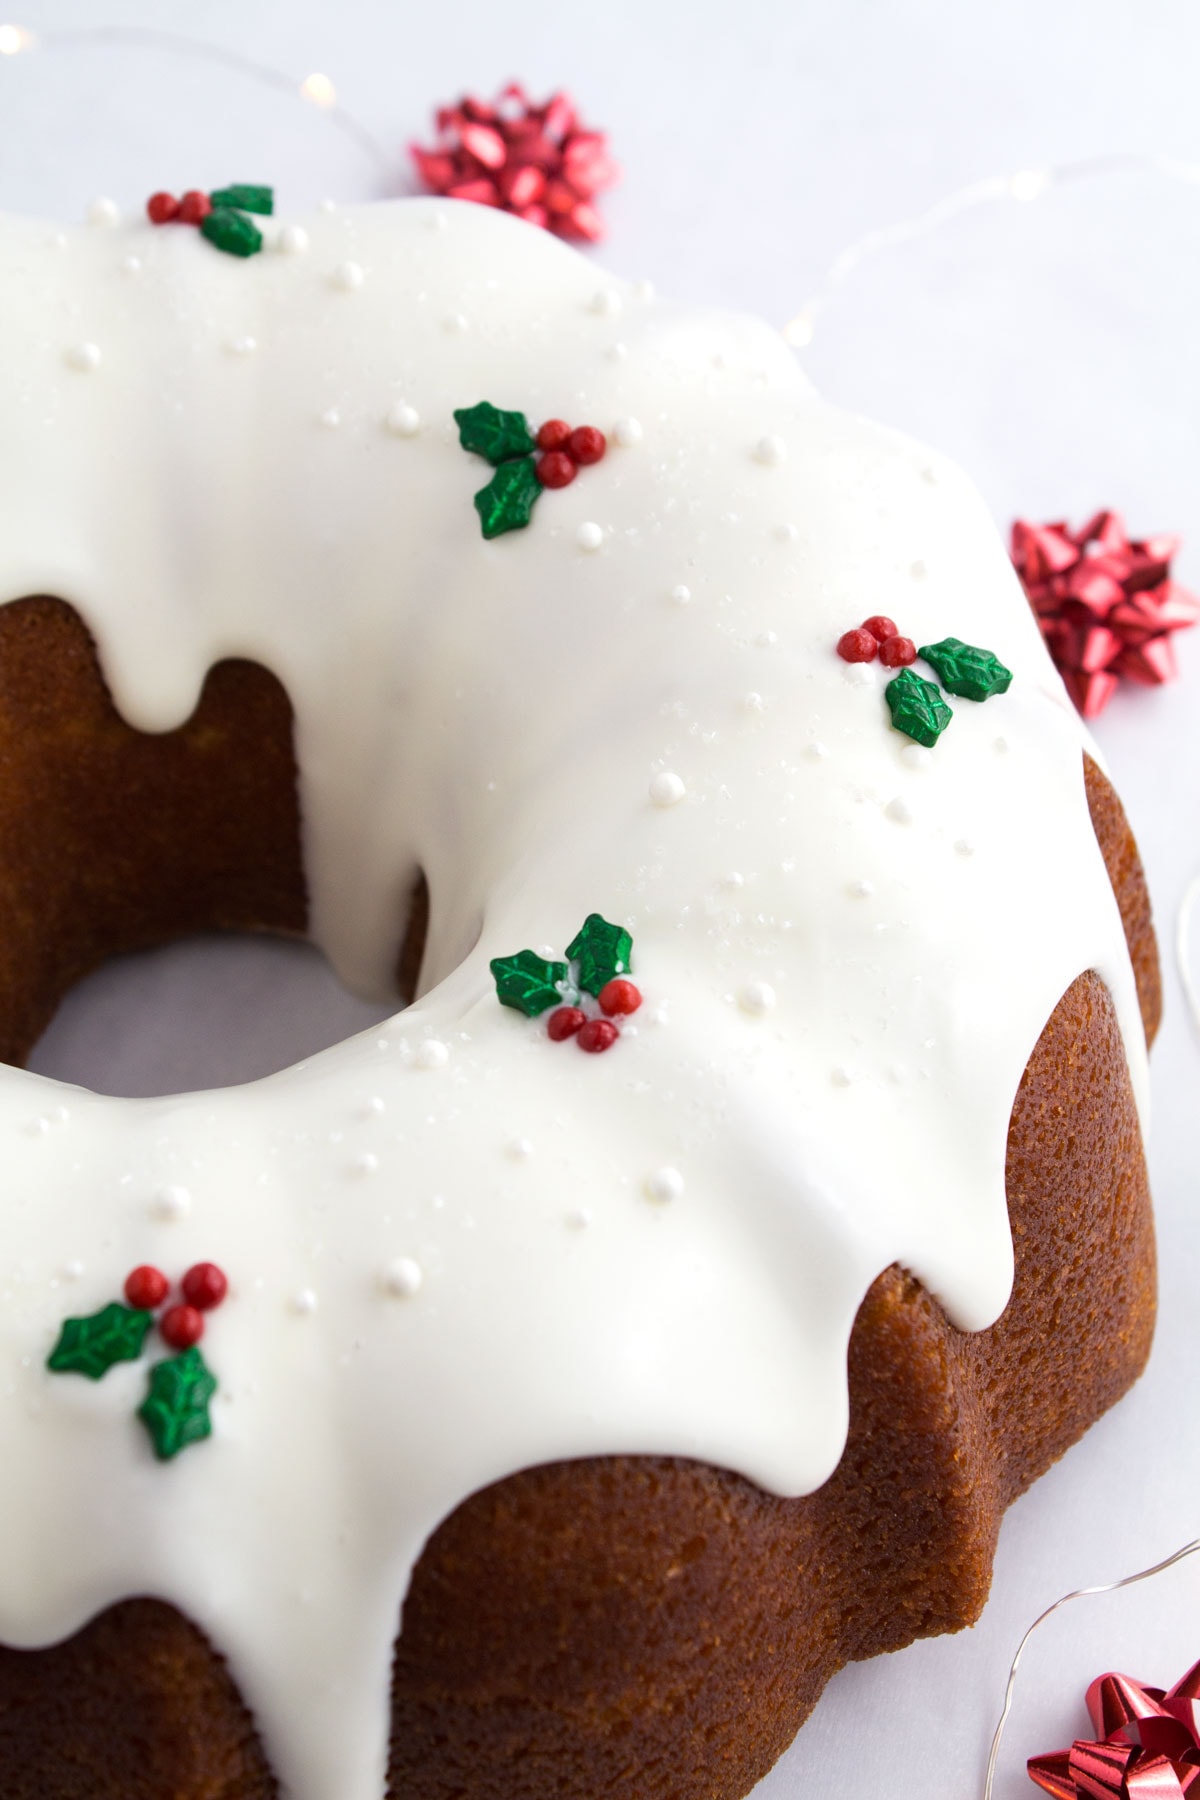 Decorating a Christmas bundt cake with holly and berry sprinkles.